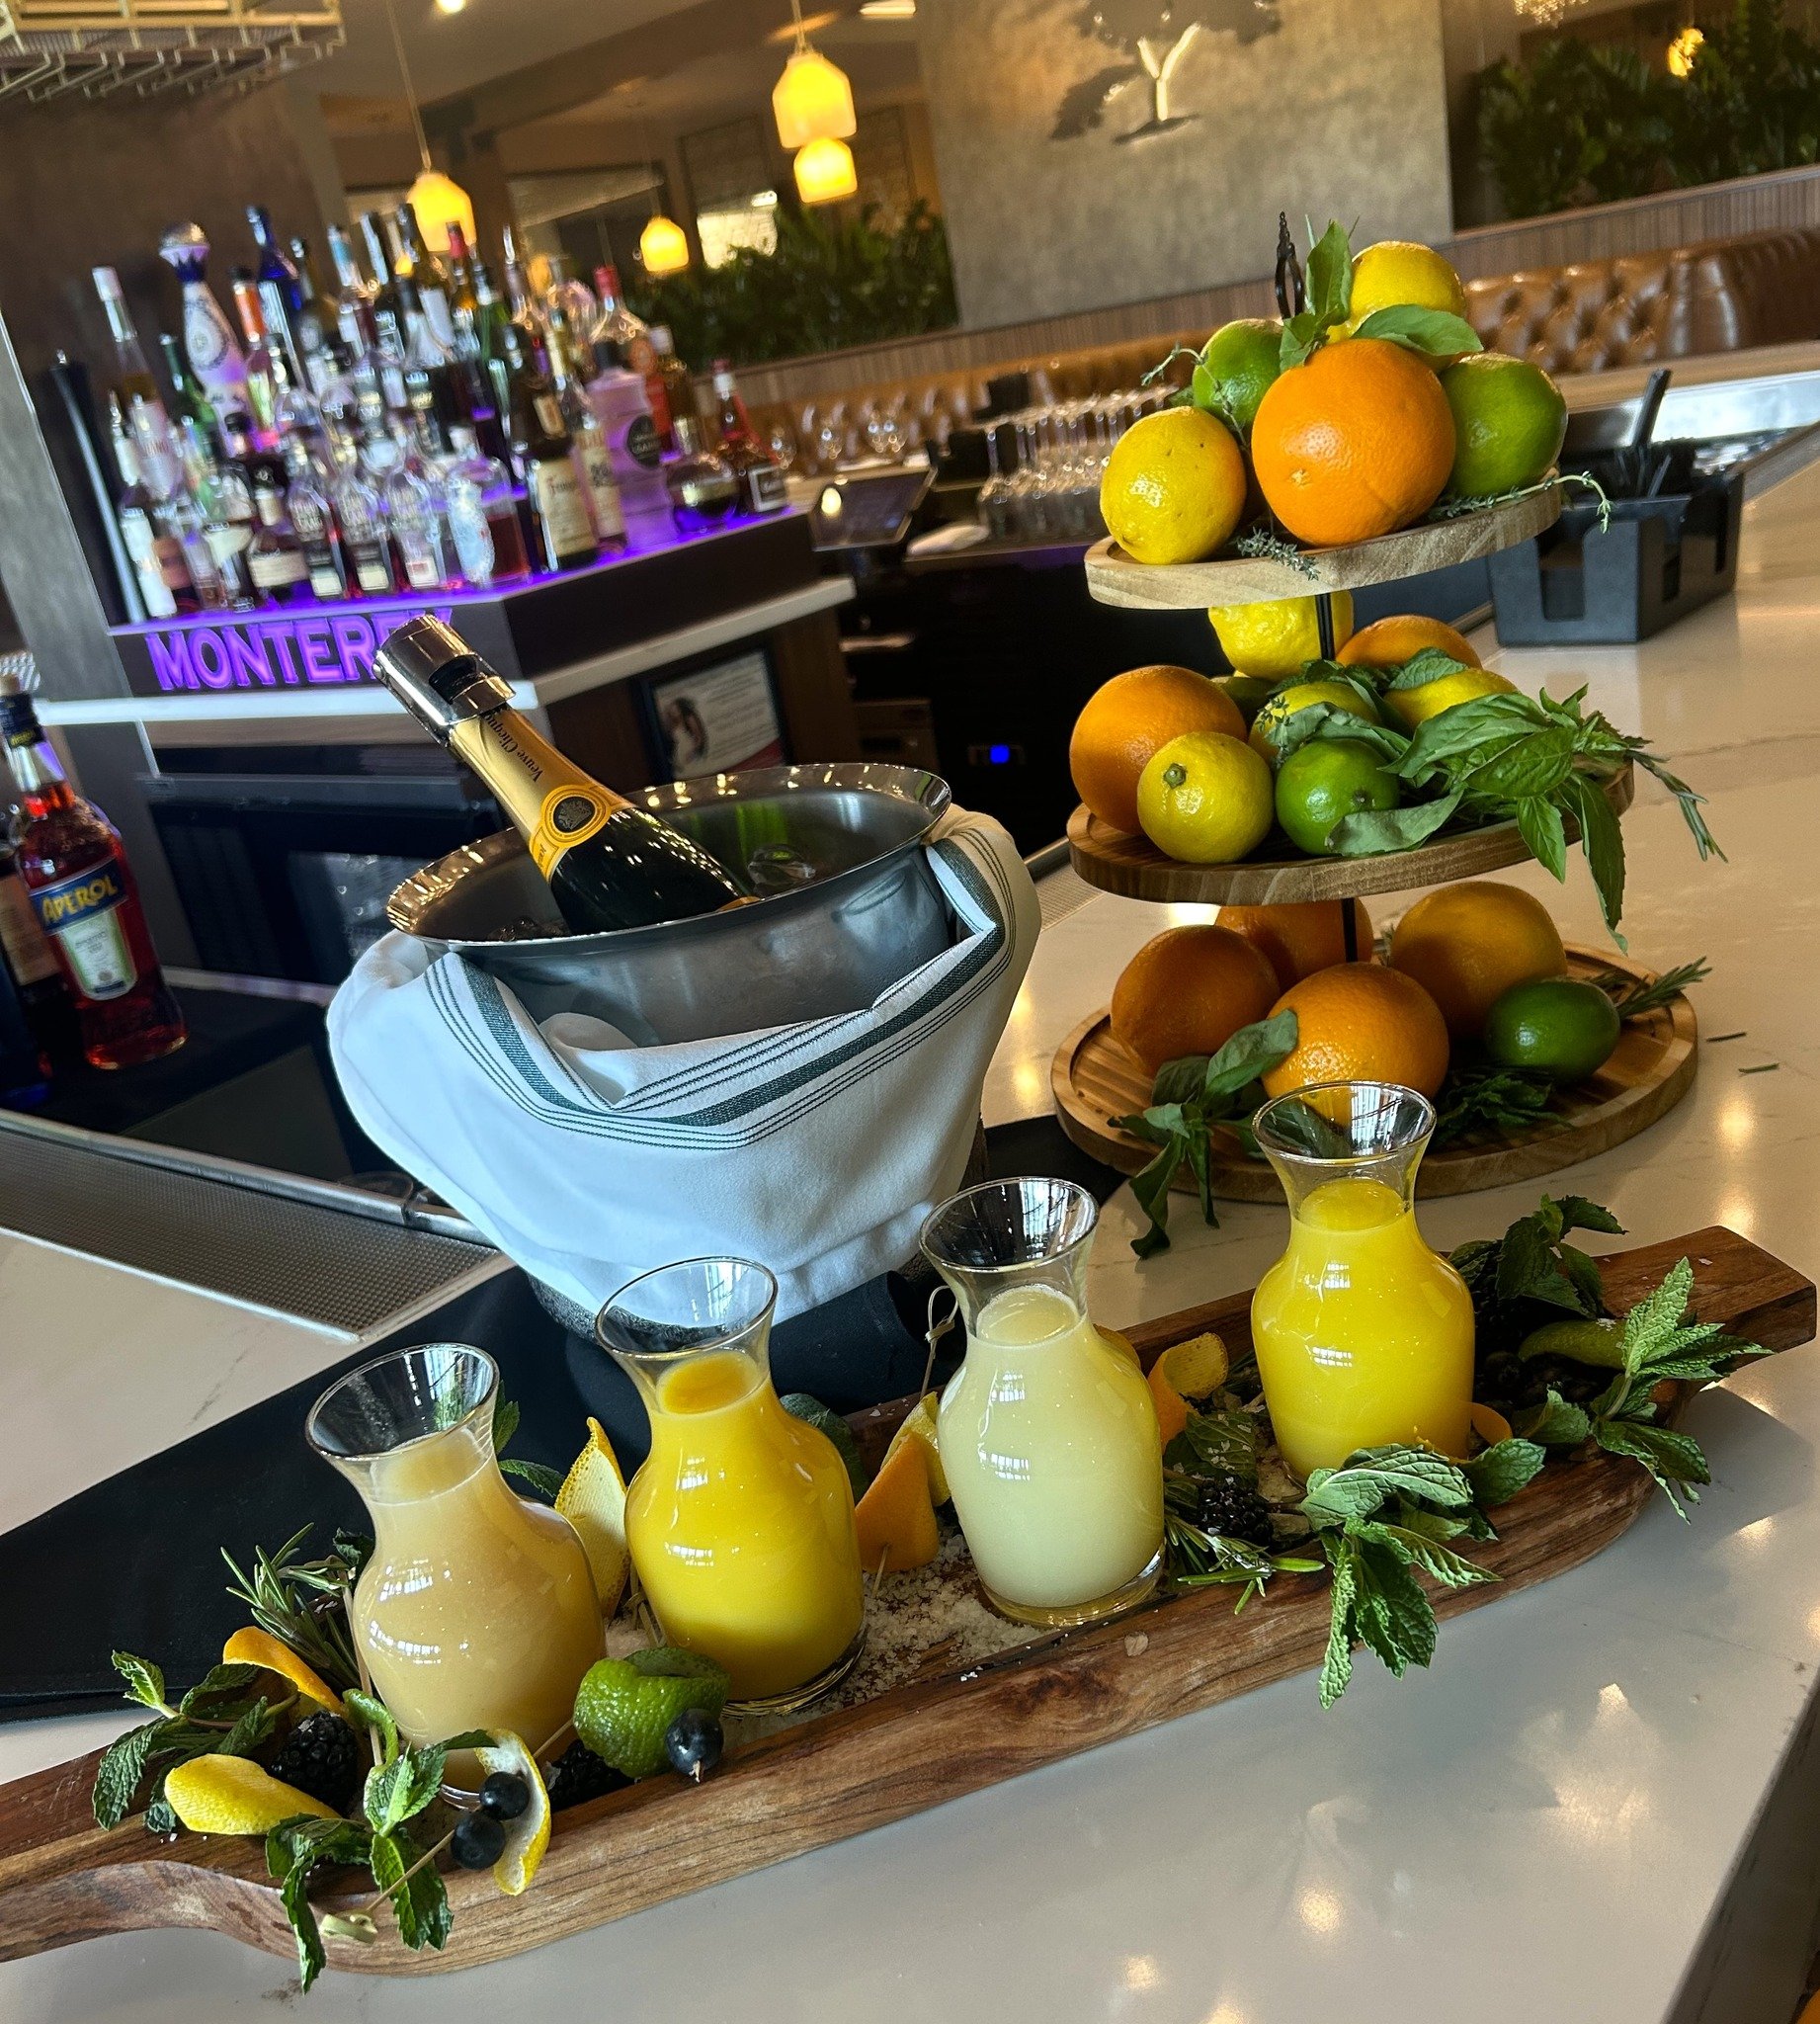 Sunday Brunch without a mimosa is just a sad, late breakfast. 🥂 Experience our Mimosa Board, delicious brunch offerings, and live jazz with us tomorrow from 10am-3pm!